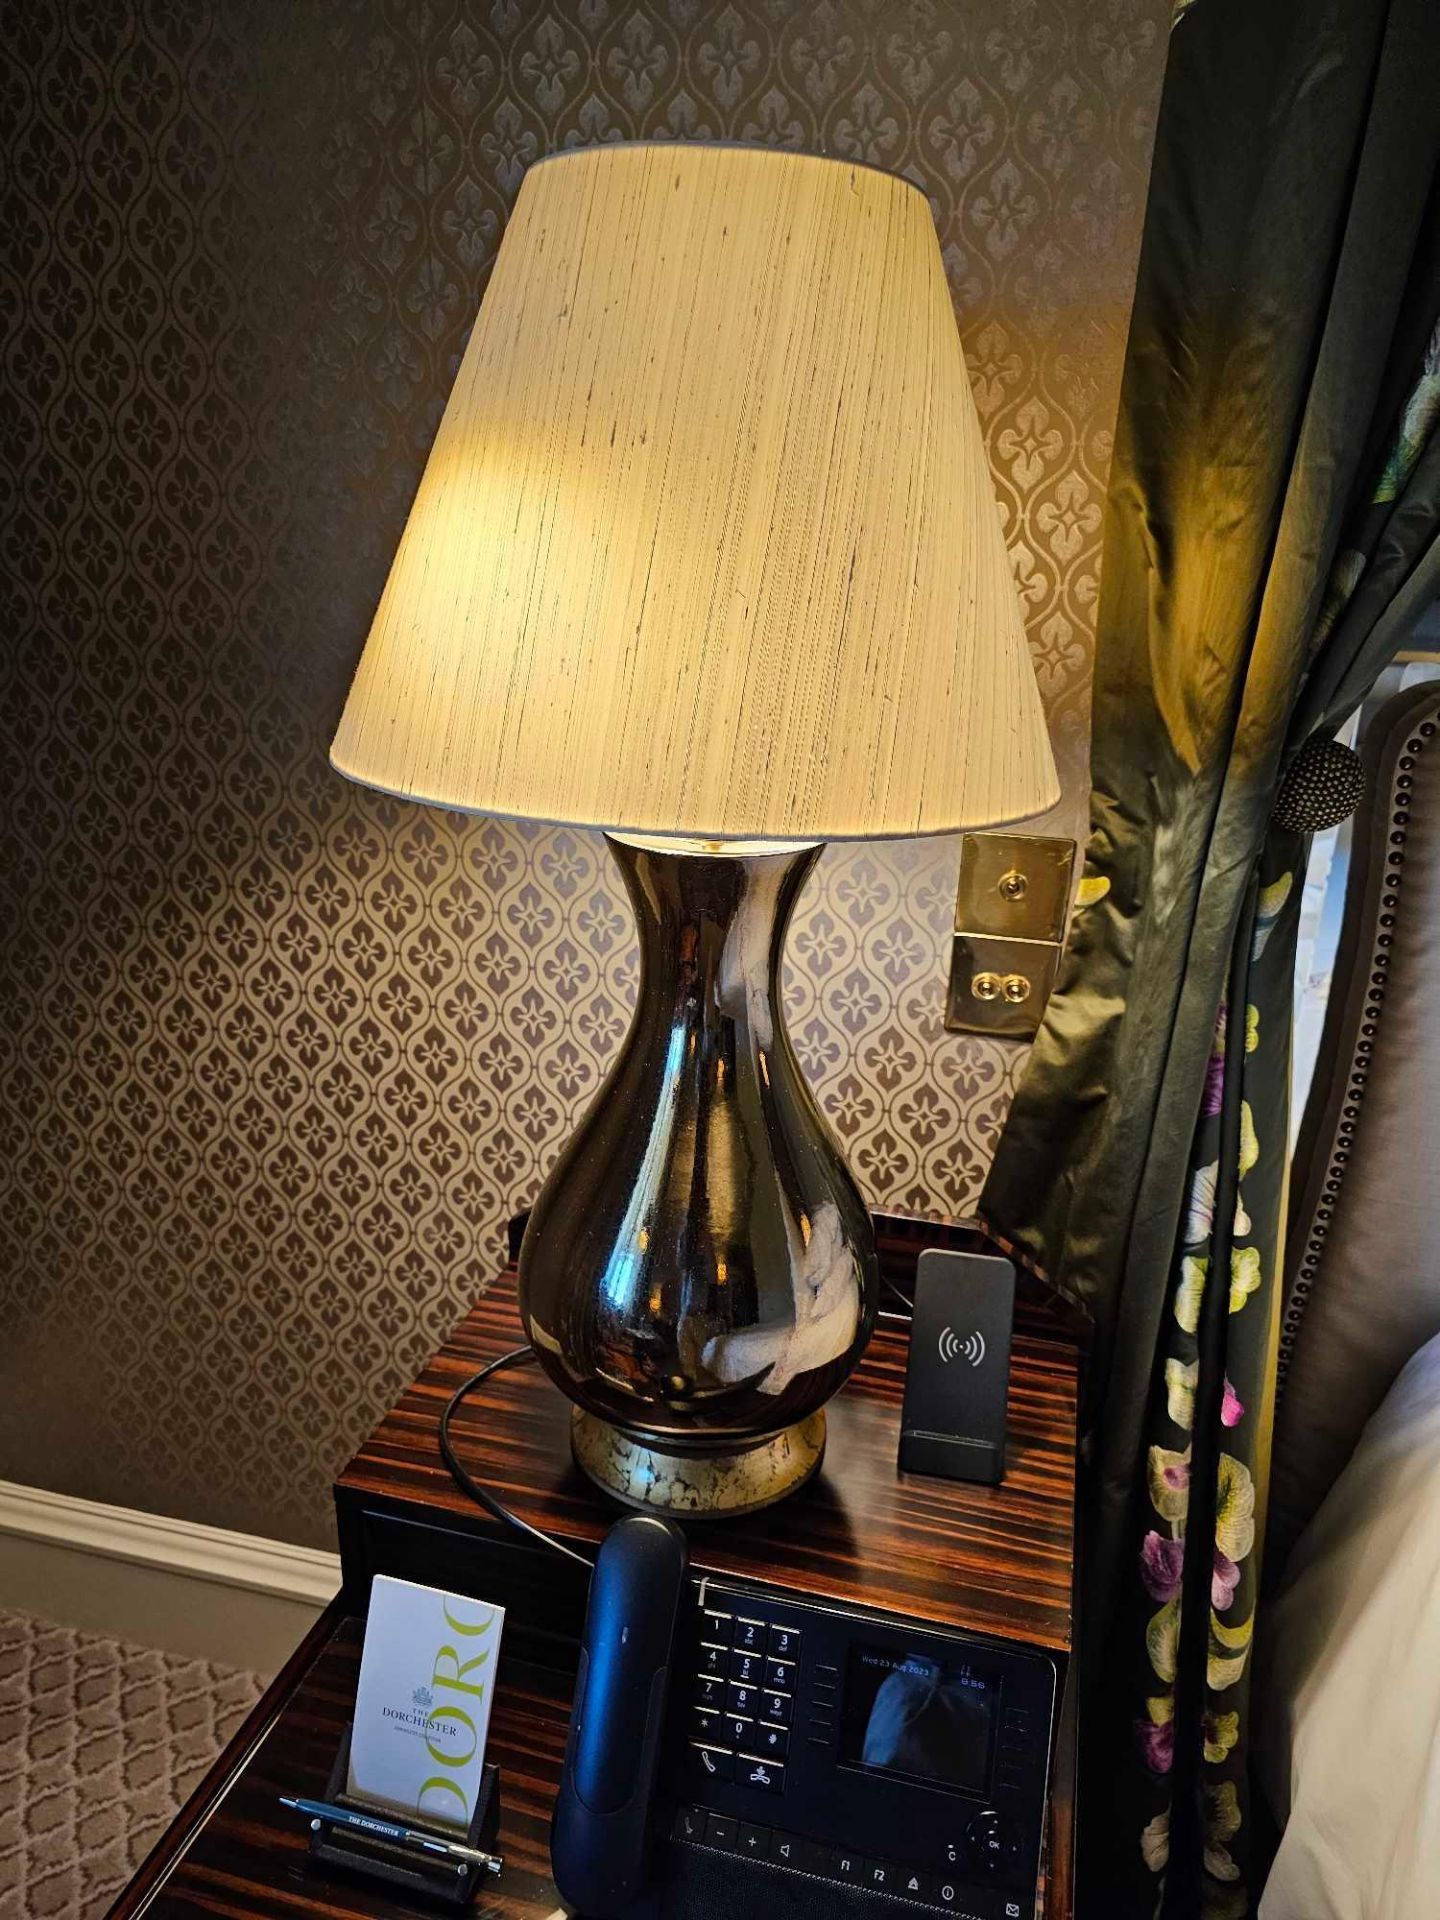 Heathfield And Co Louisa Glazed Ceramic Table Lamp With Textured Shade 77cm